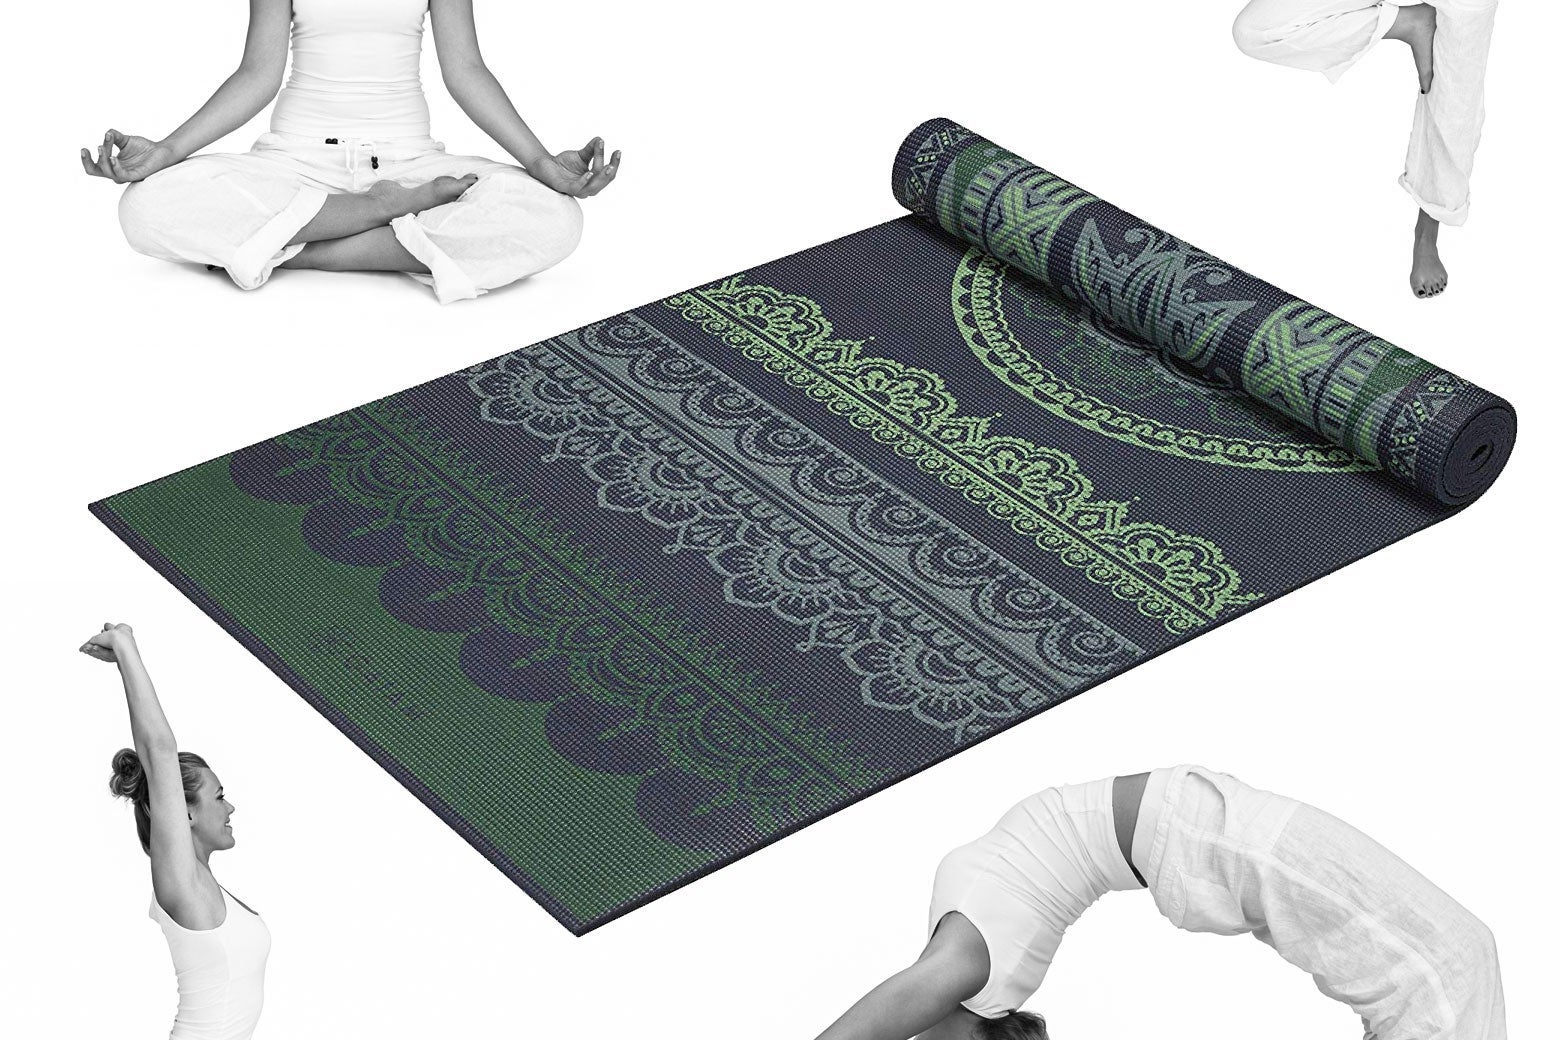 Gaiam reversible yoga mat is now on sale.